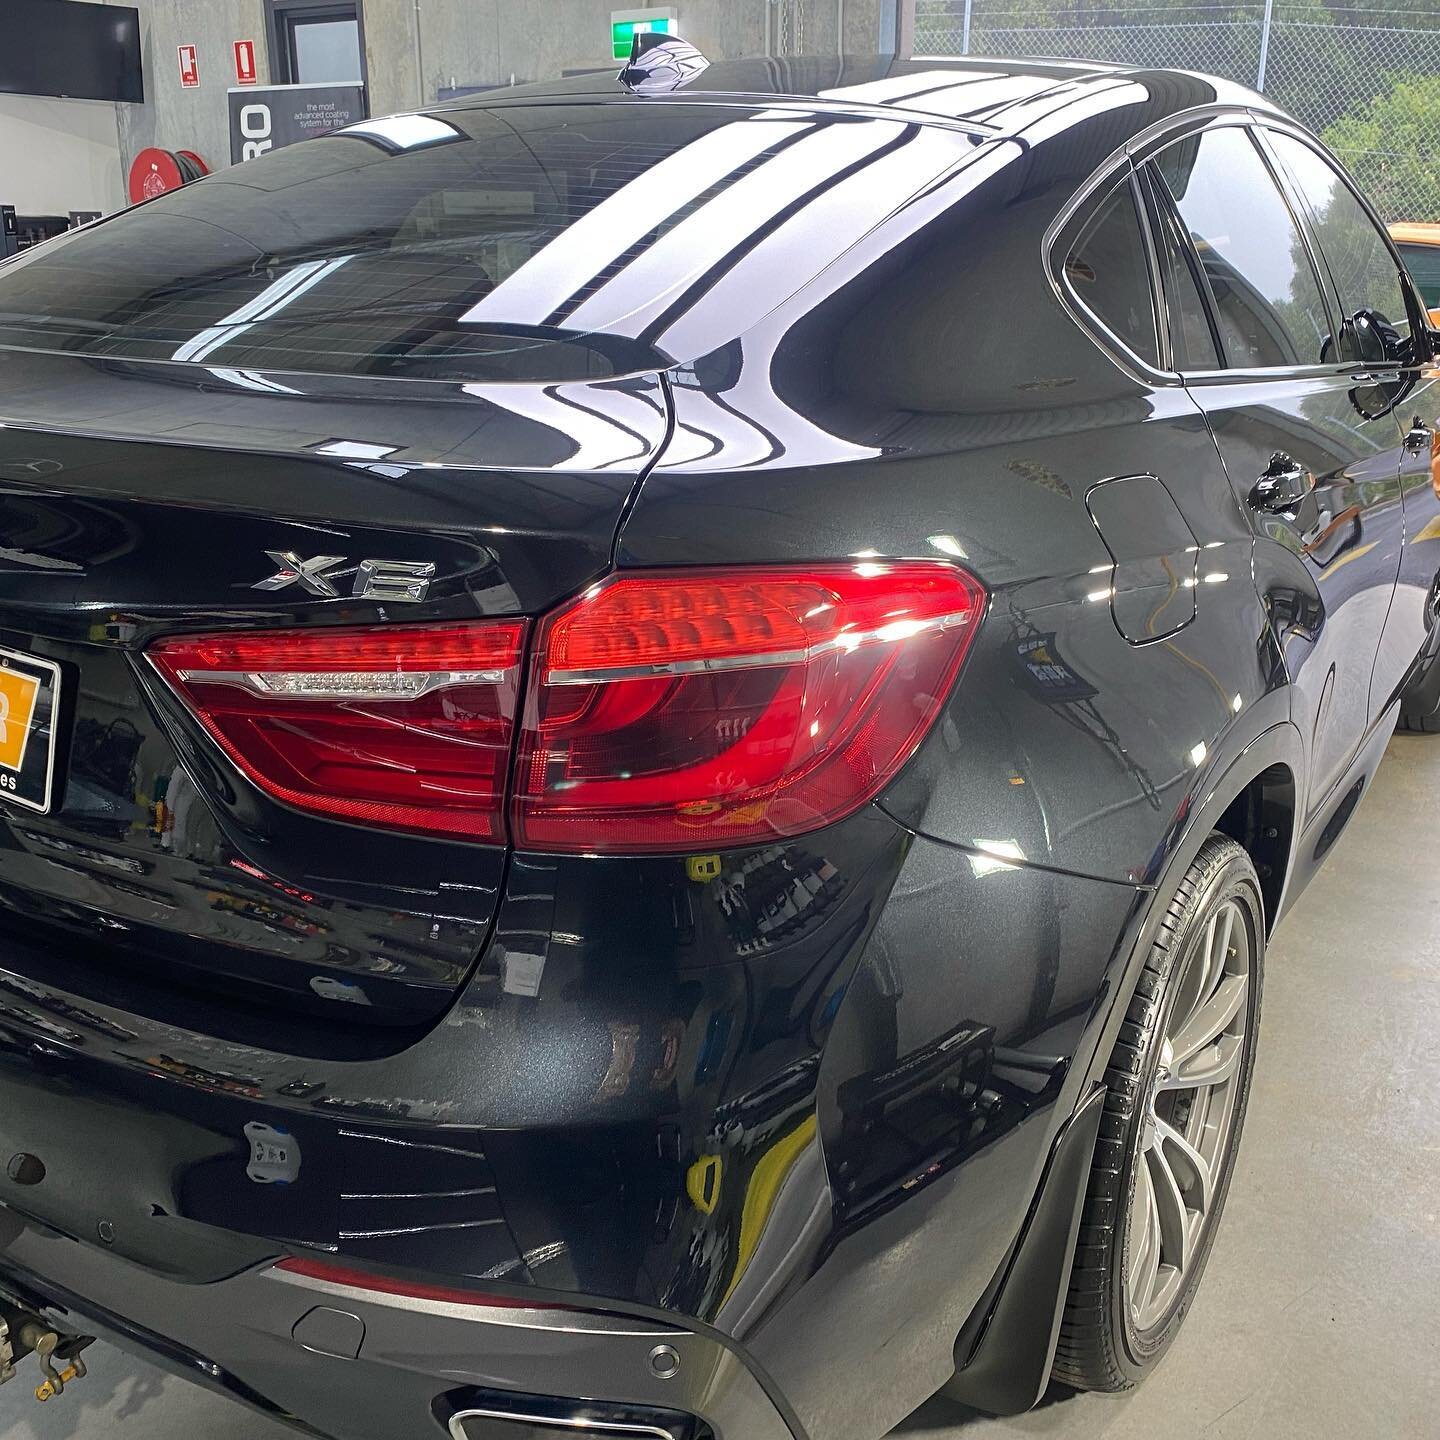 Pre delivery detail and our Graphene coating on this BMW X6 for our friends @theautogallery_ig 
&bull;
&bull;

#bmrdetailing #sydneymobiledetailing #detailing #Sydney #mpower #ceramiccoatings #bmw #mercedesbenz #audi #porsche #detailer #sydneyaustral